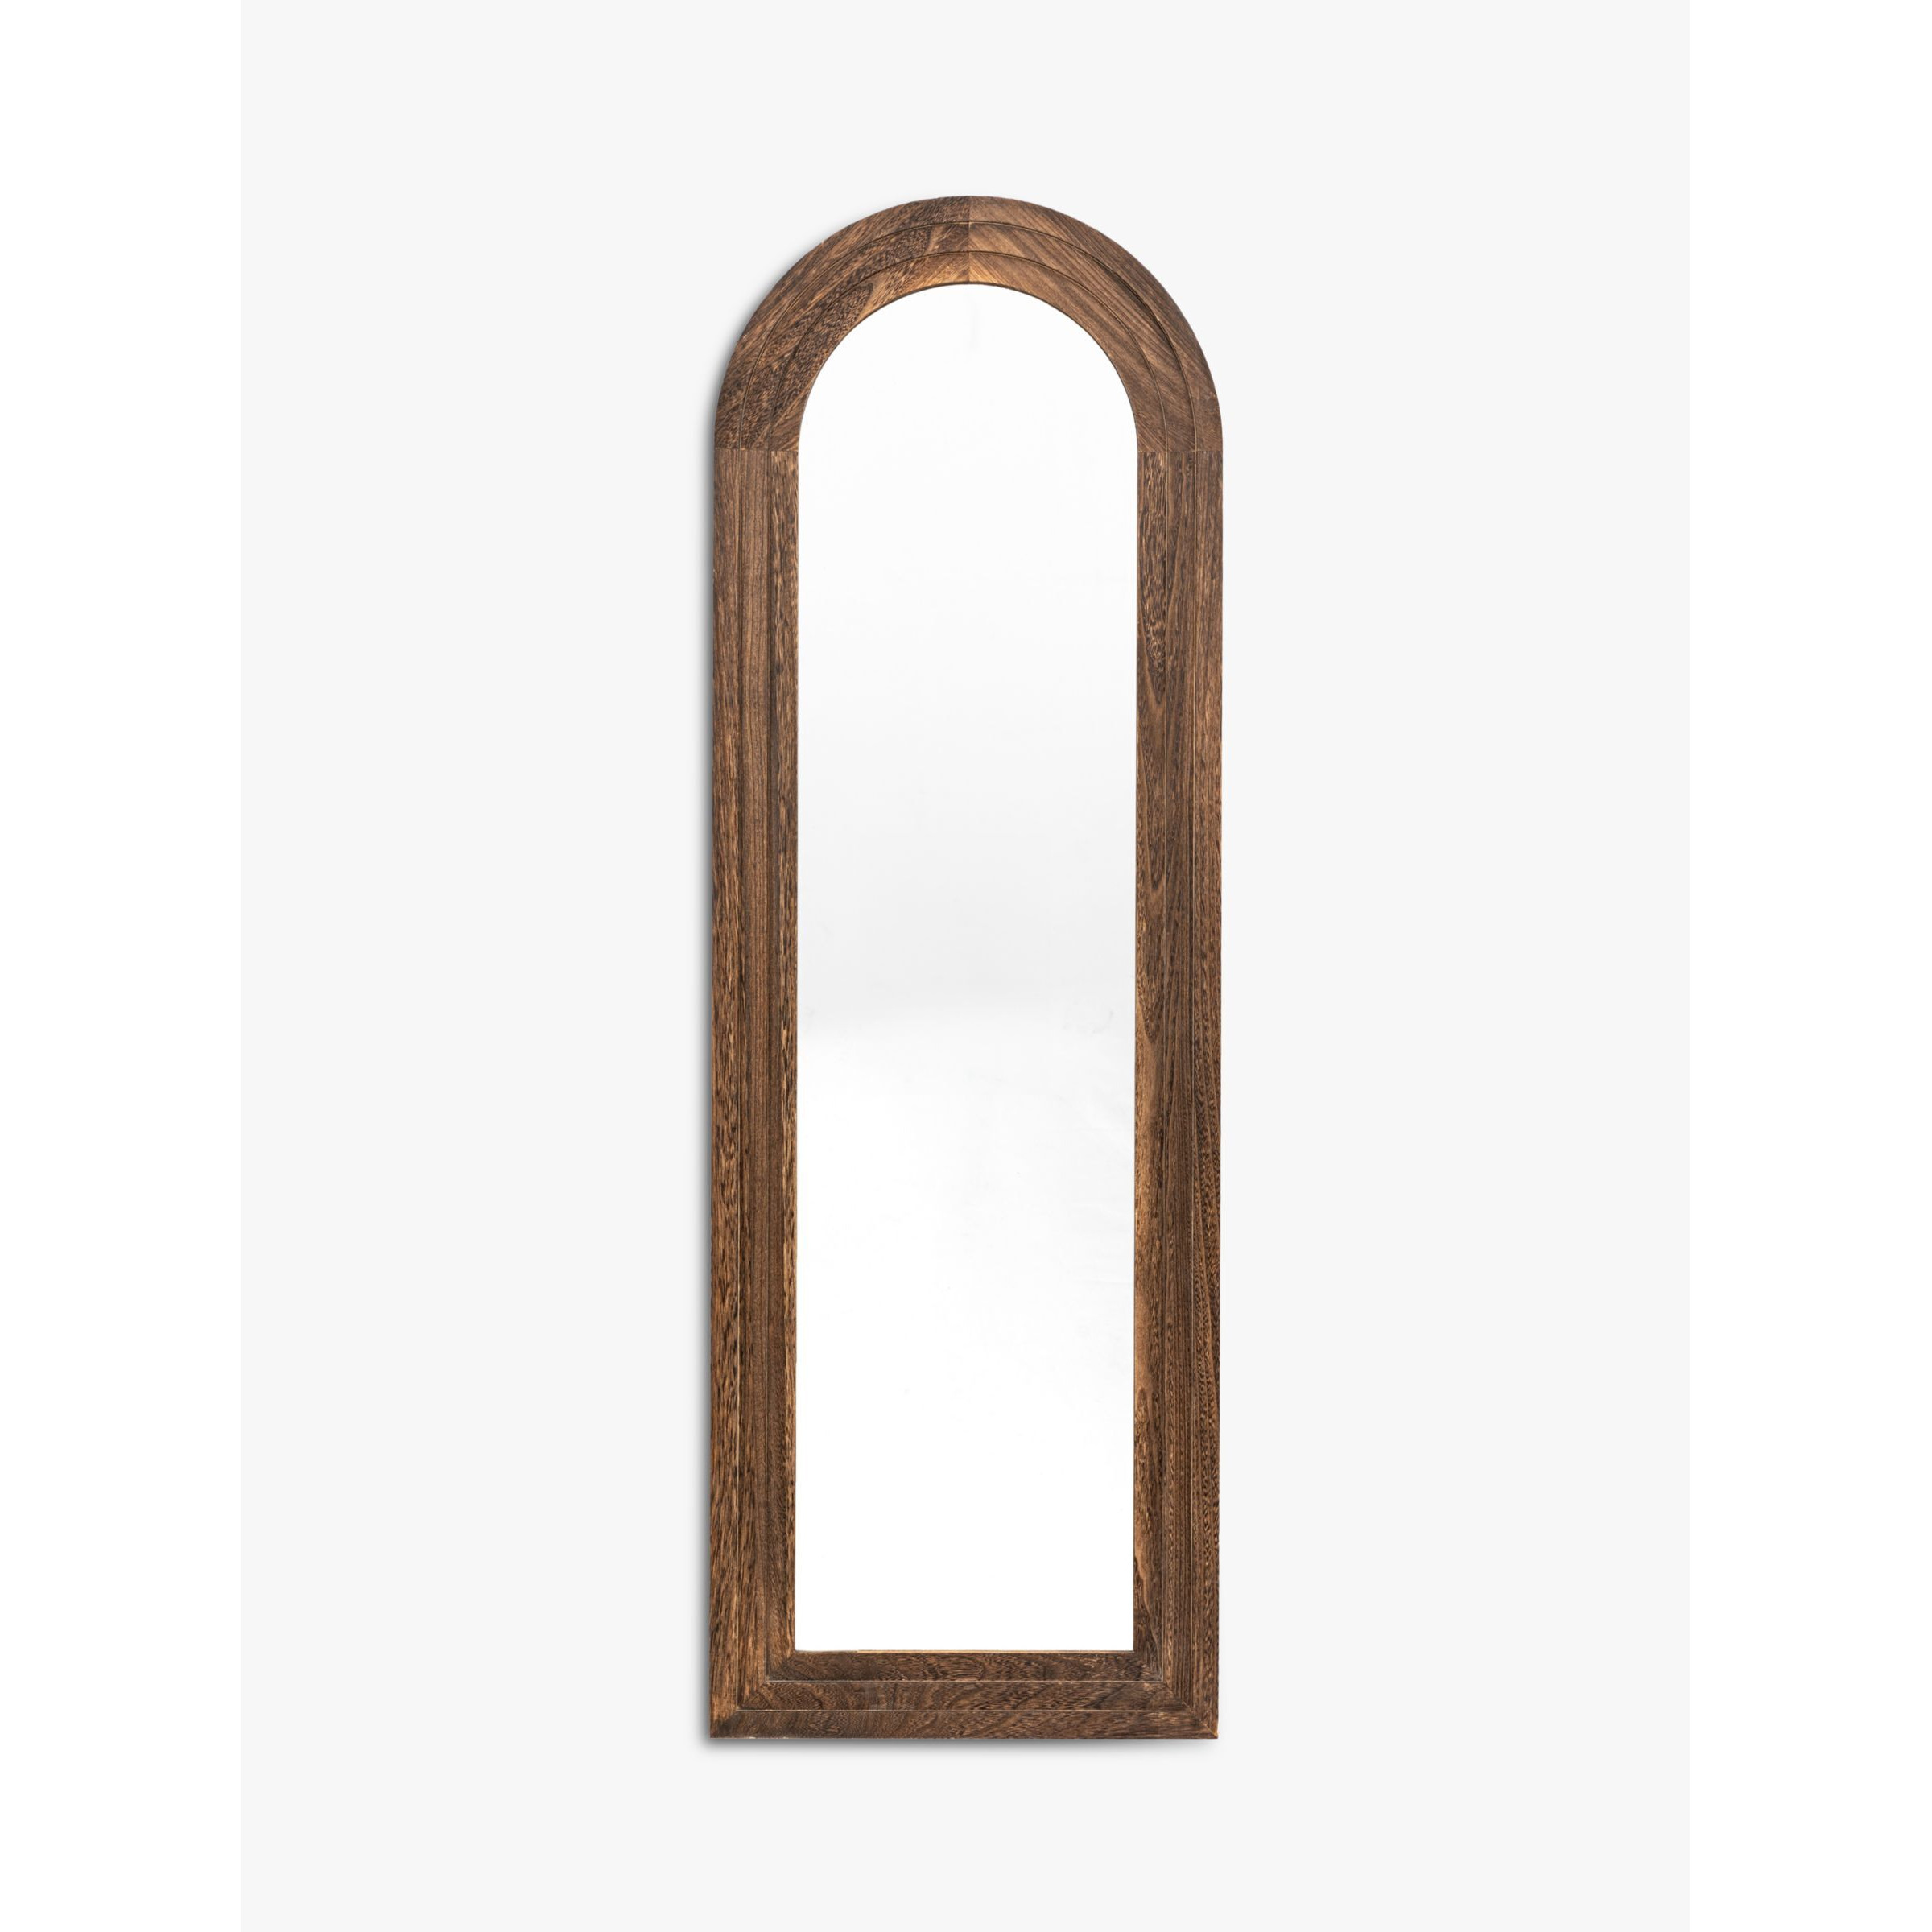 Gallery Direct Modesto Full-Length Arched Wooden Wall Mirror, 163 x 54cm, Dark Wood - image 1